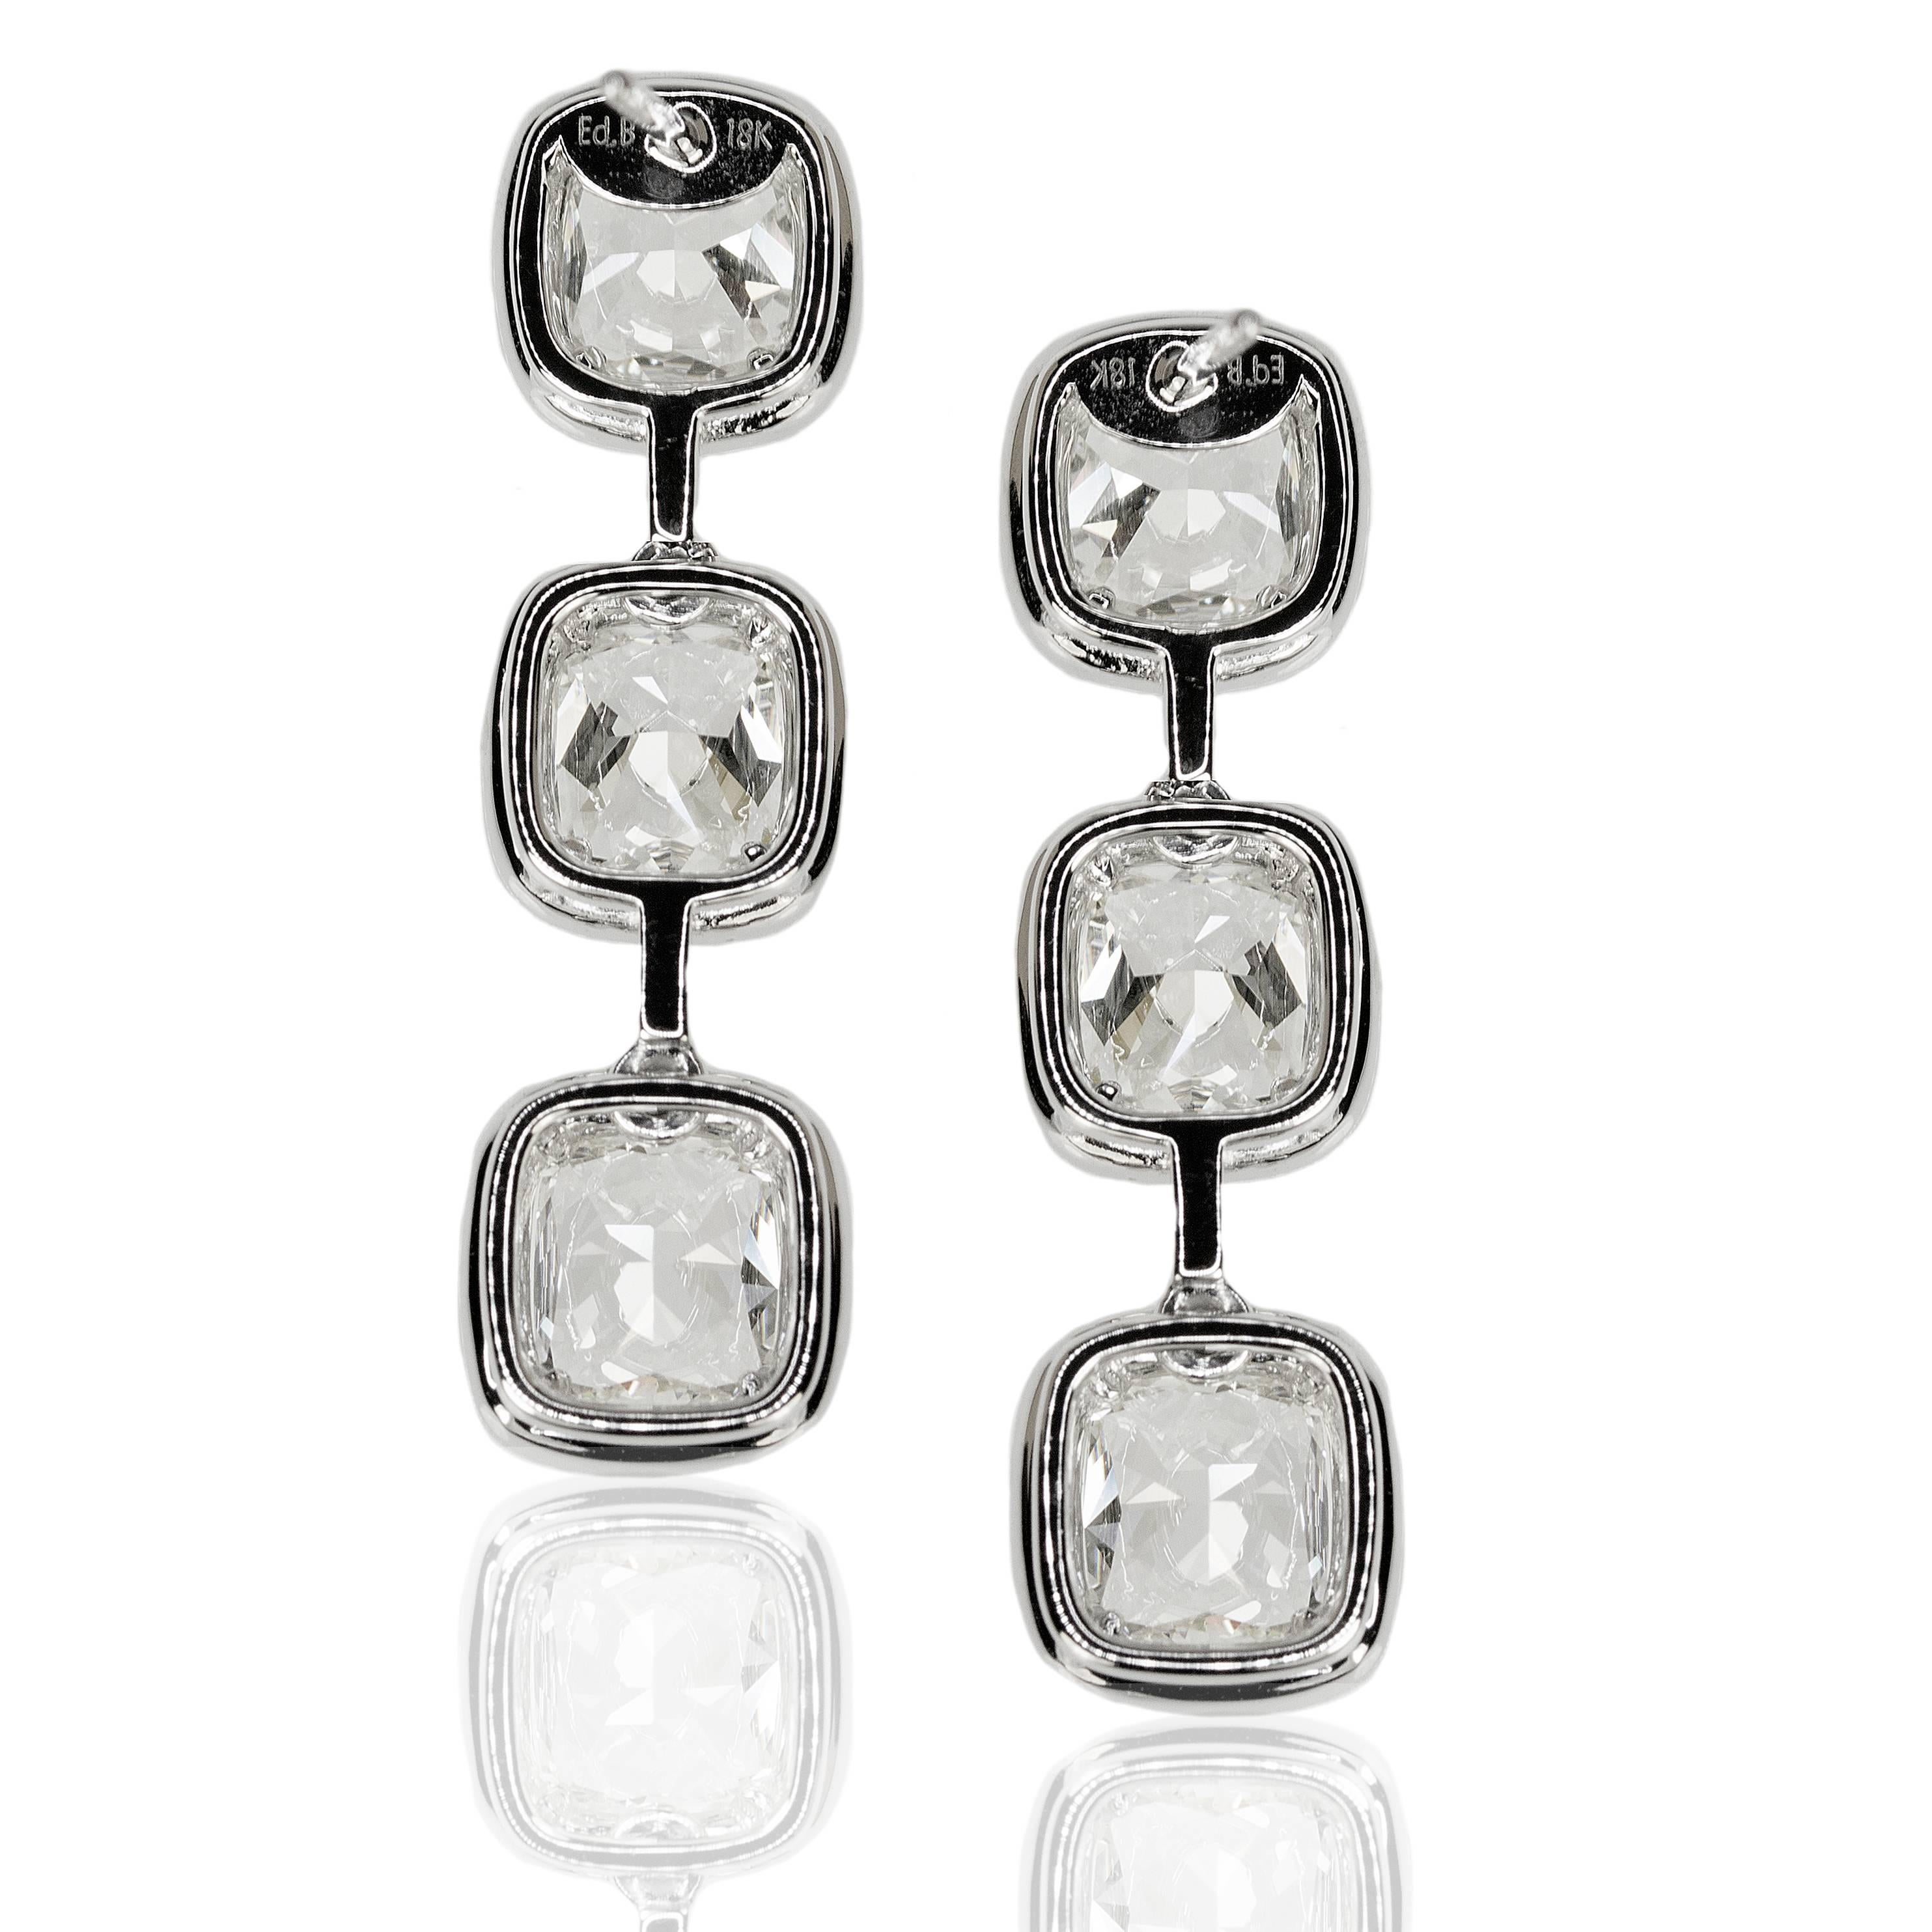 Stunning Cushion Shape Diamond Earrings Set in 18 Gold In New Condition For Sale In Sarasota, FL